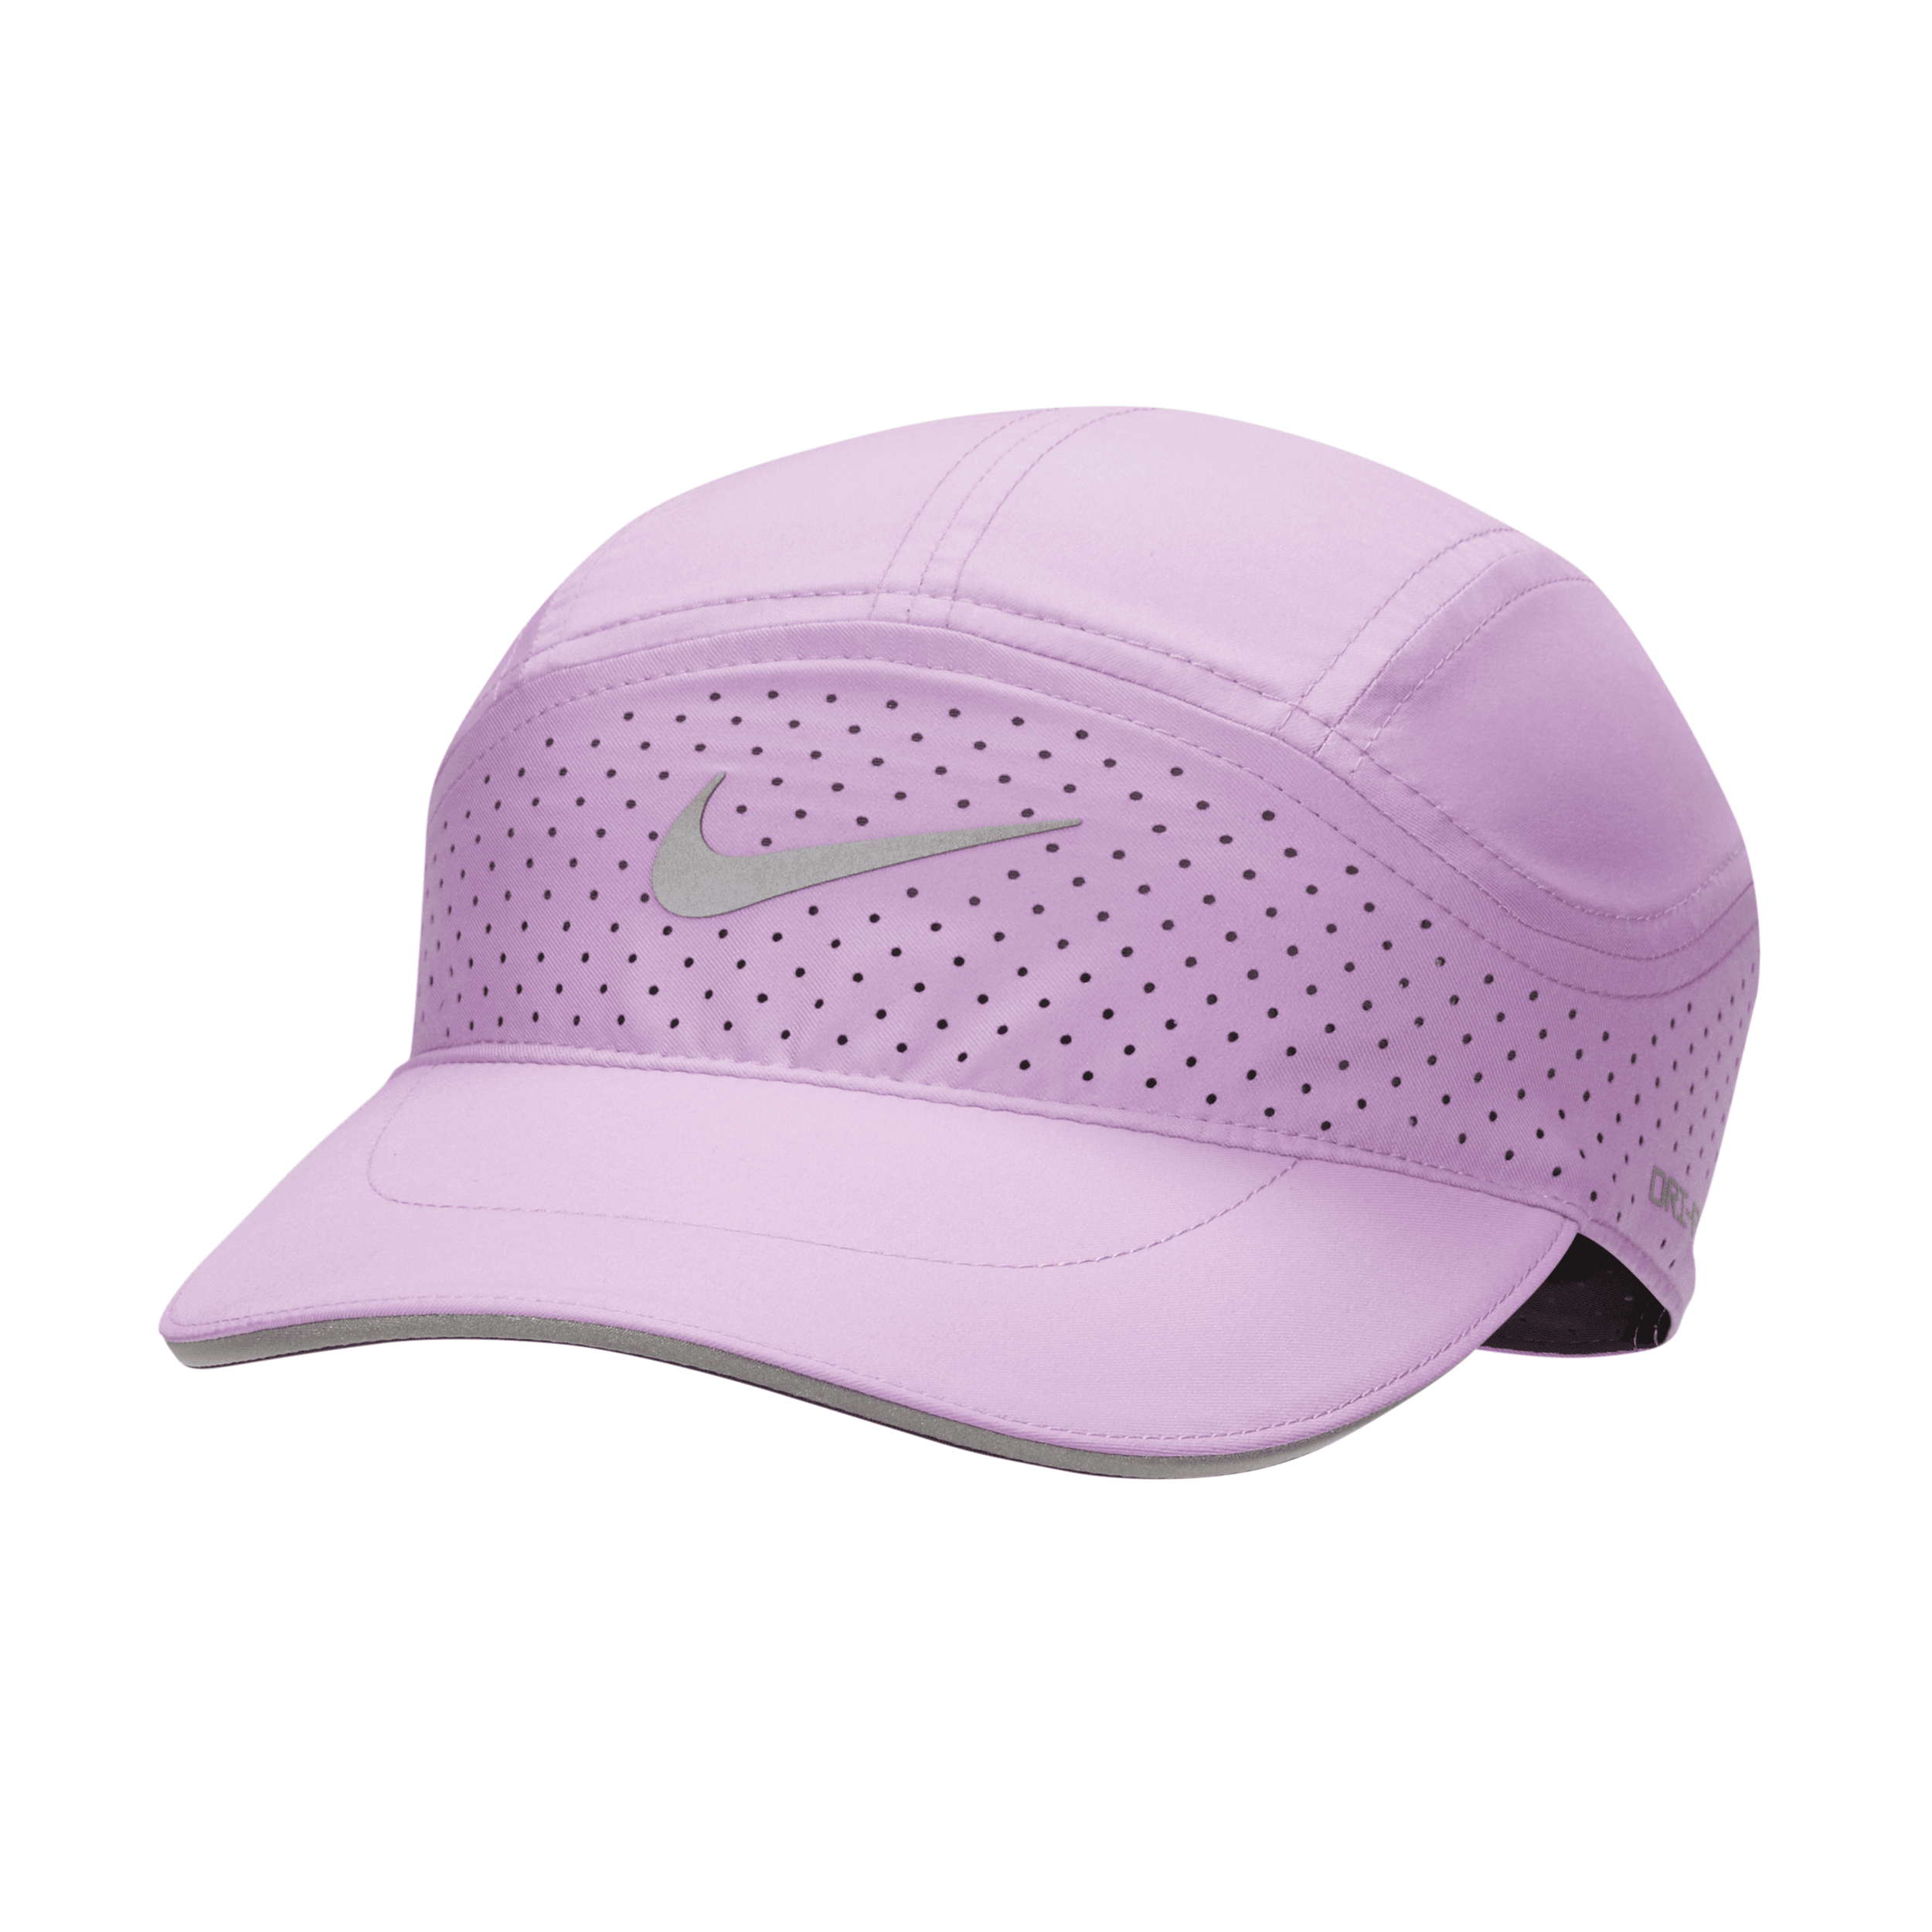 Nike Unisex Dri-fit Adv Fly Unstructured Reflective Cap In Purple